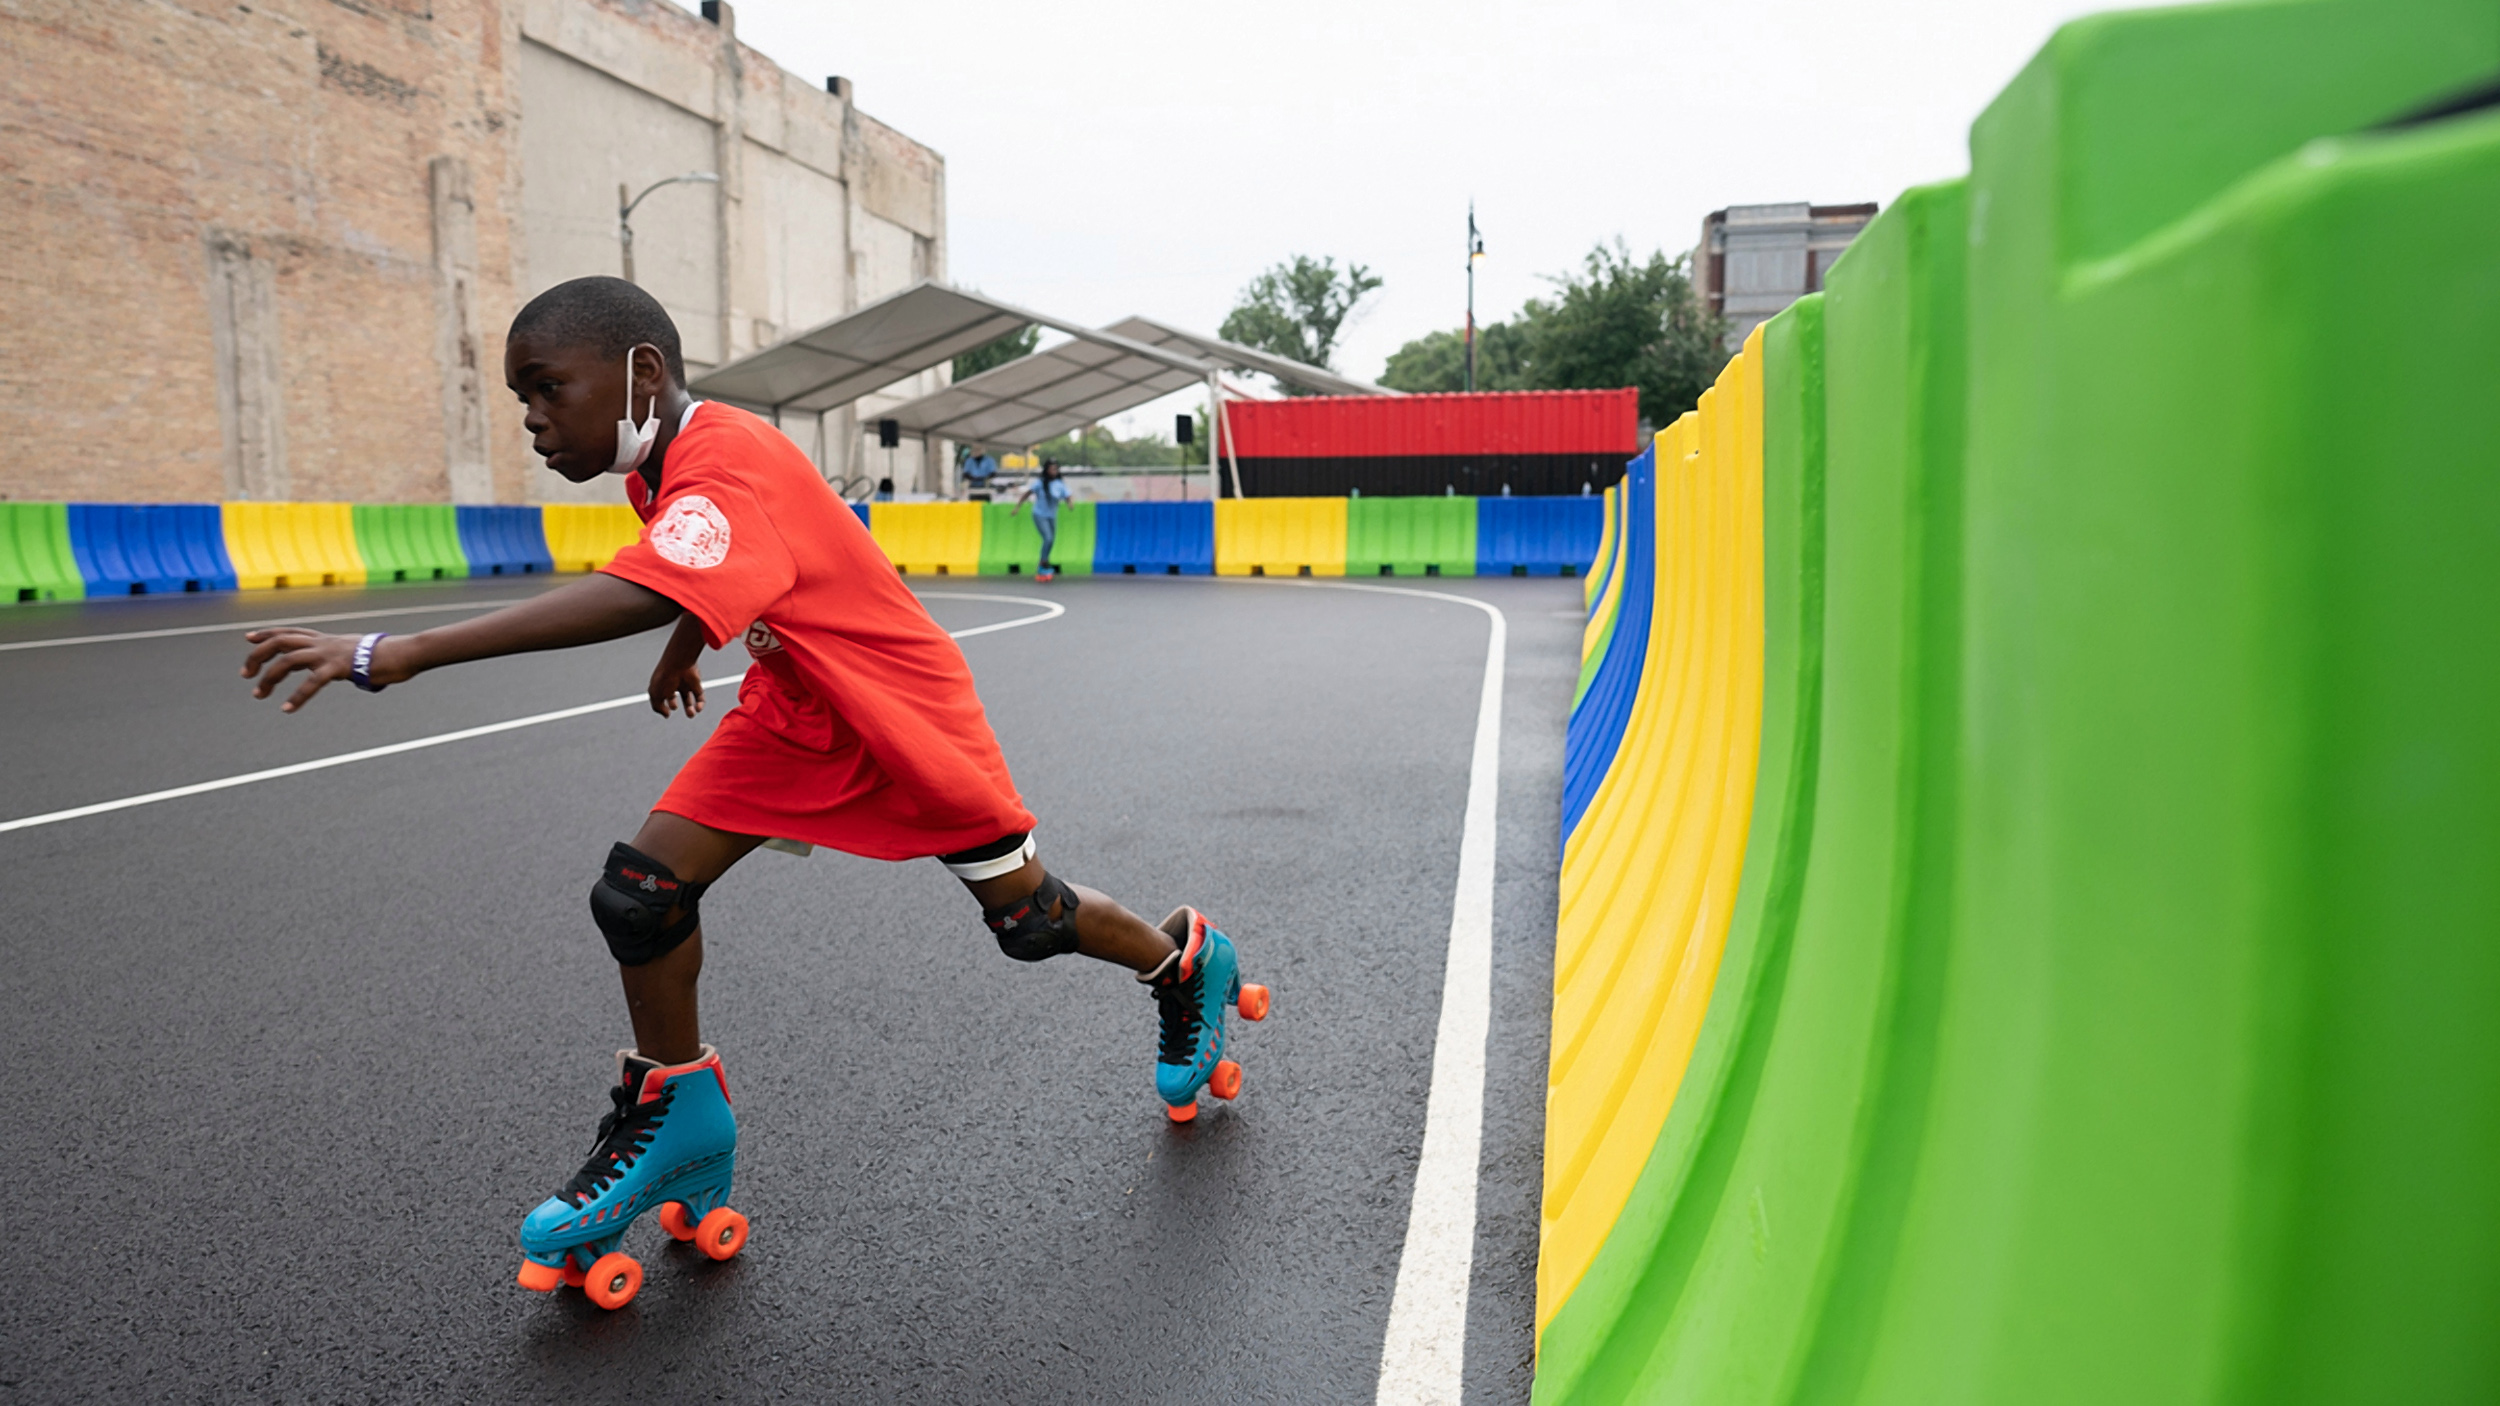 Damarion Weatherspoon skates at the community plaza and outdoor roller rink at Madison Street and Pulaski Road in West Garfield Park on August 6, 2021.